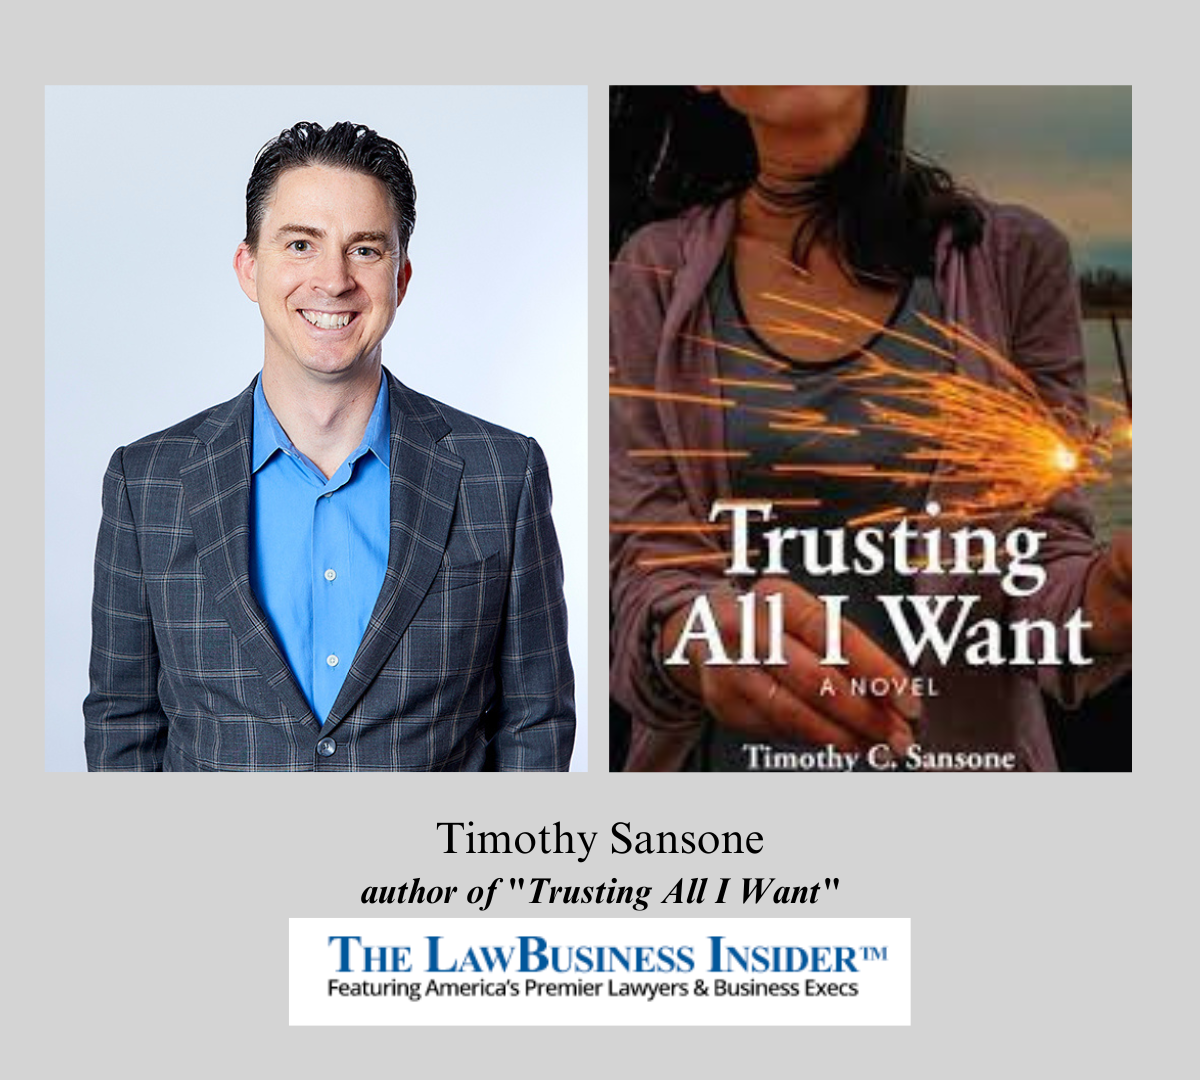 Timothy Sansone author of Trusting All I Want The LawBusiness Insider Interview Image